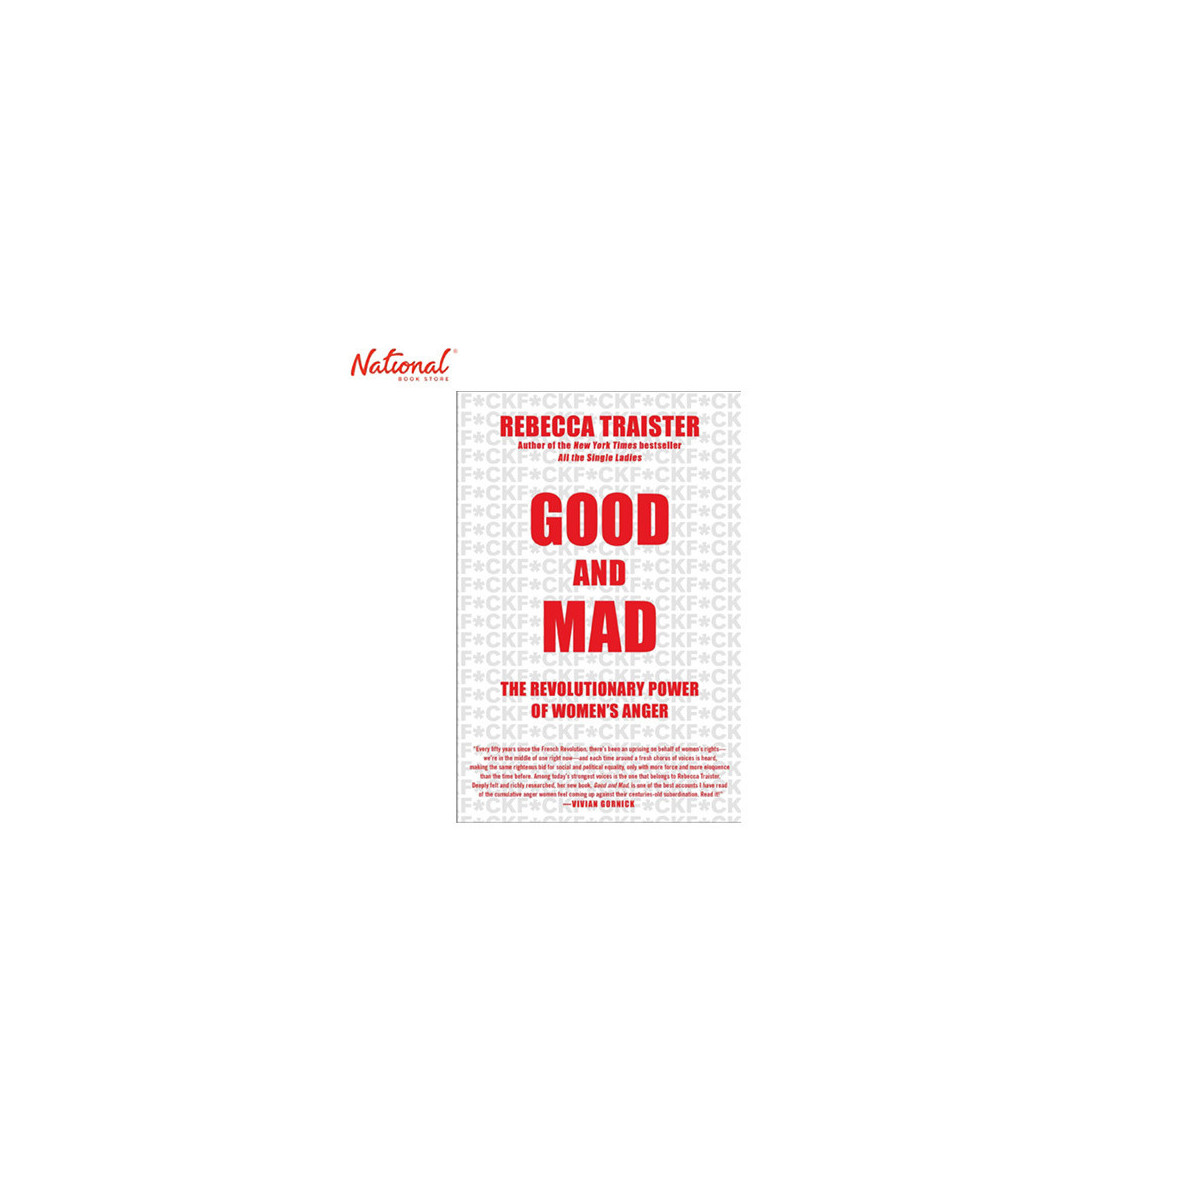 GOOD AND MAD: THE REVOLUTIONARY POWER OF WOMEN'S ANGER TRADE PAPERBACK